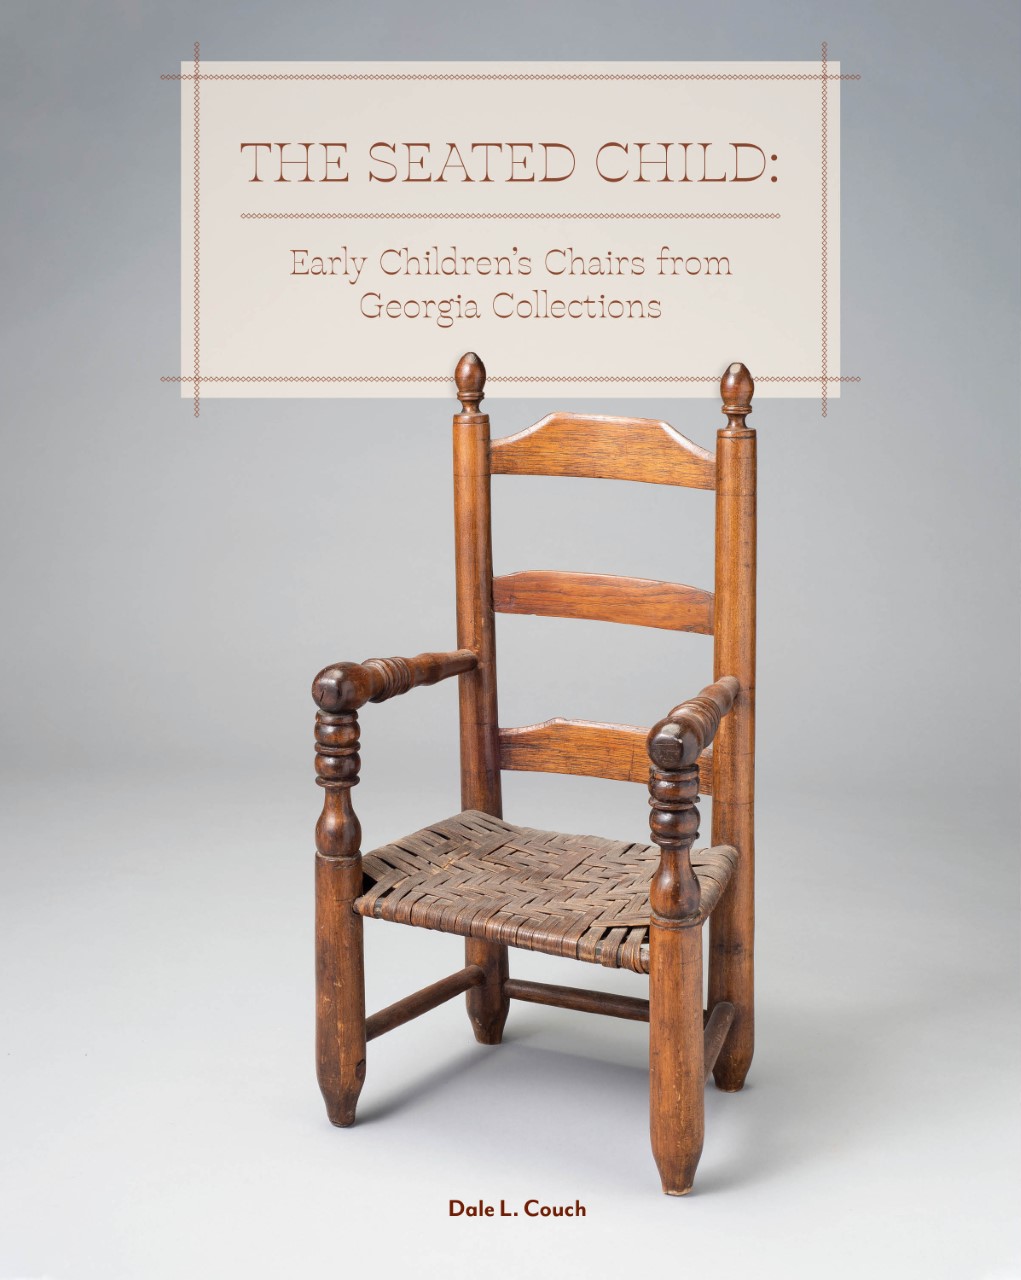 The Seated Child: Early Children’s Chairs from Georgia Collections